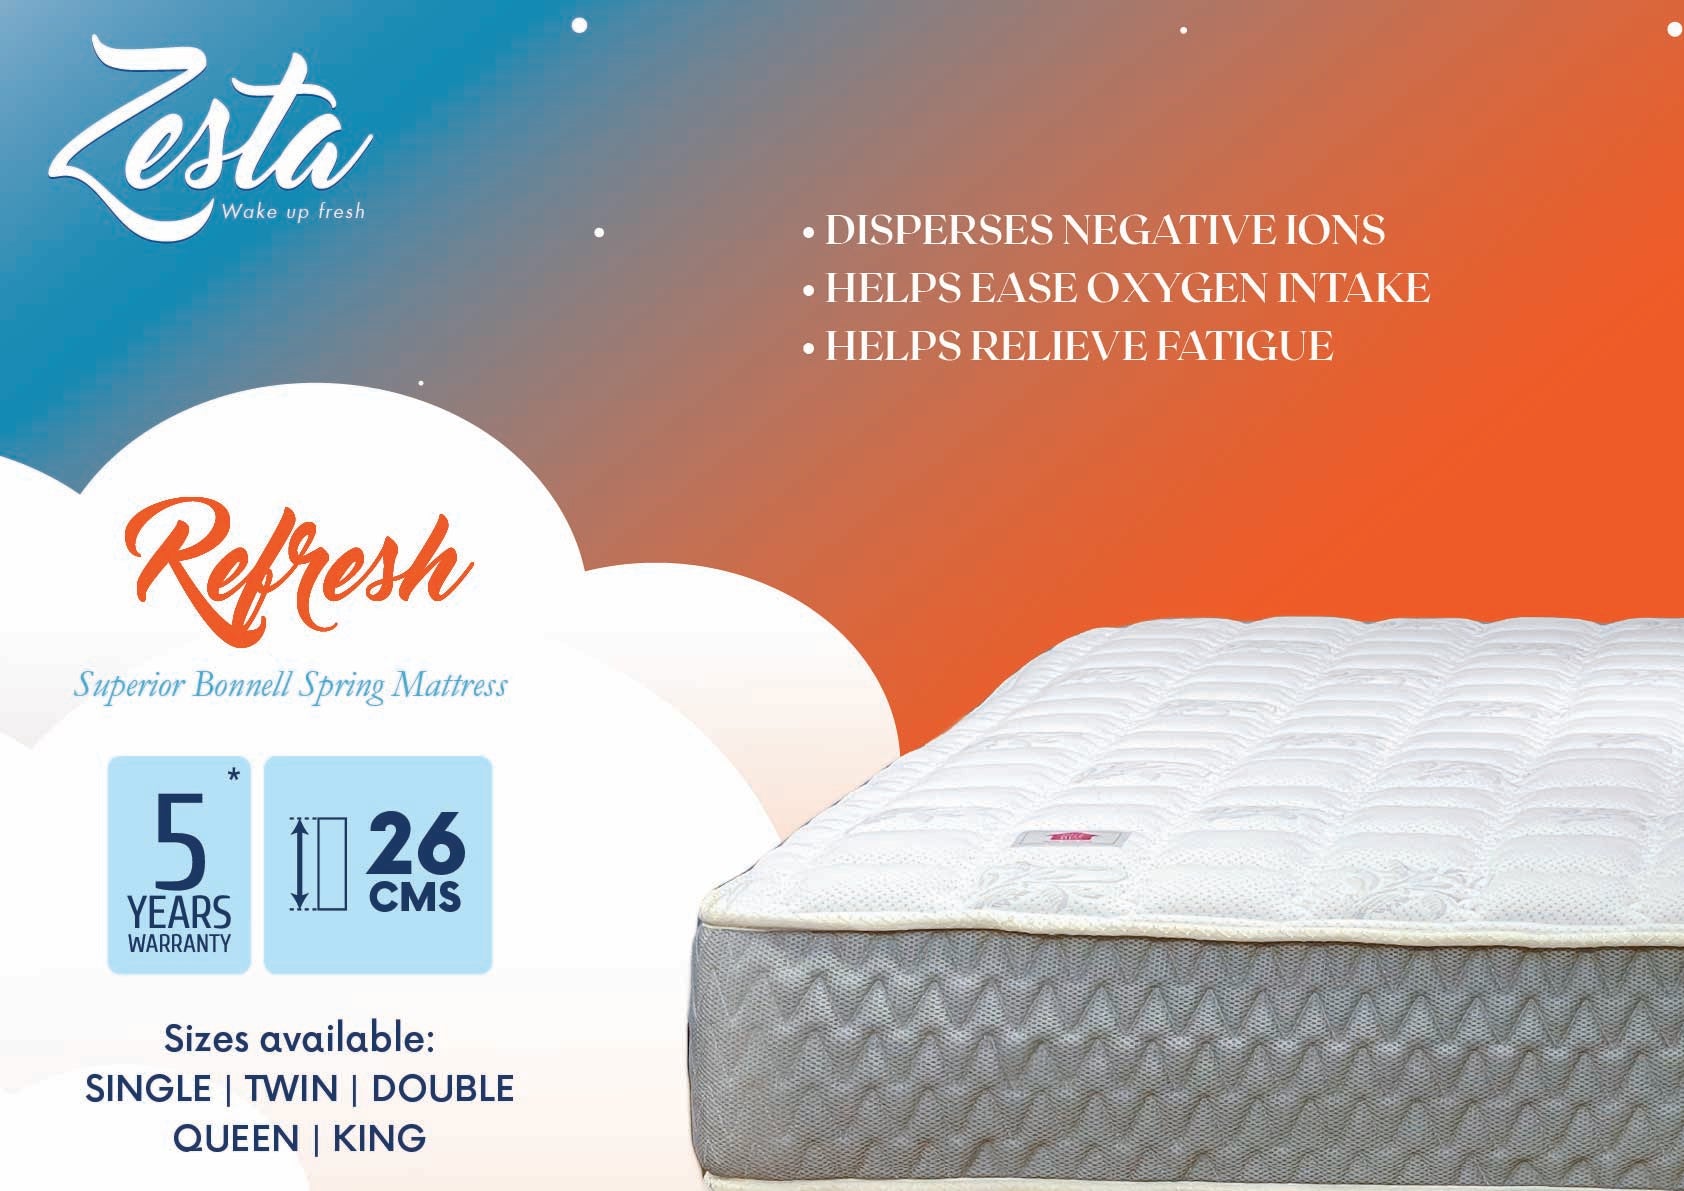 bonnell spring mattress pros and cons